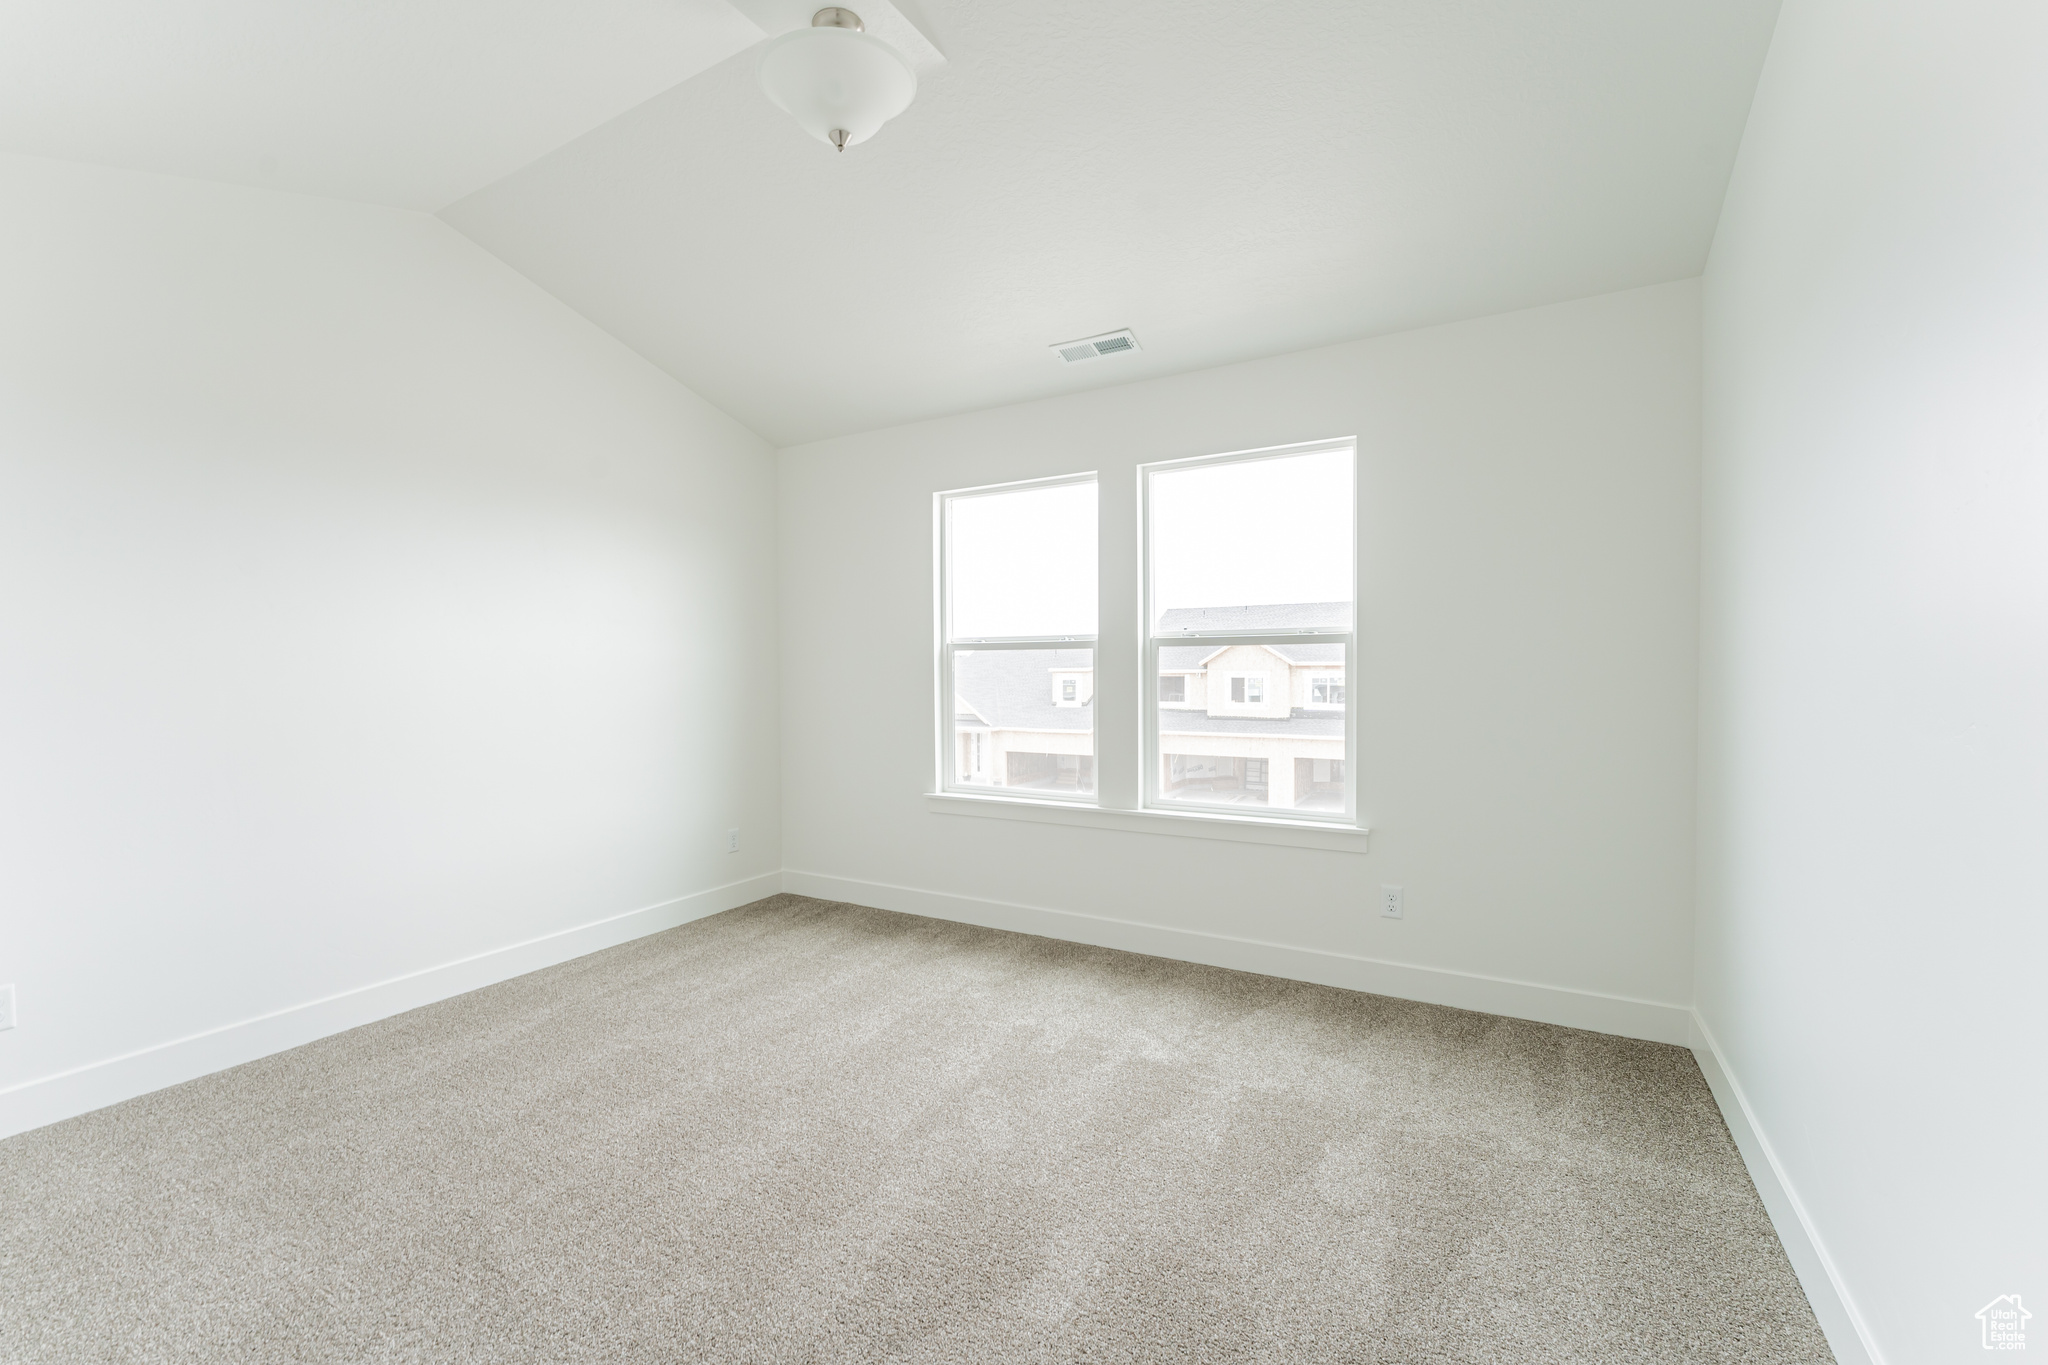 Spare room with vaulted ceiling and light colored carpet